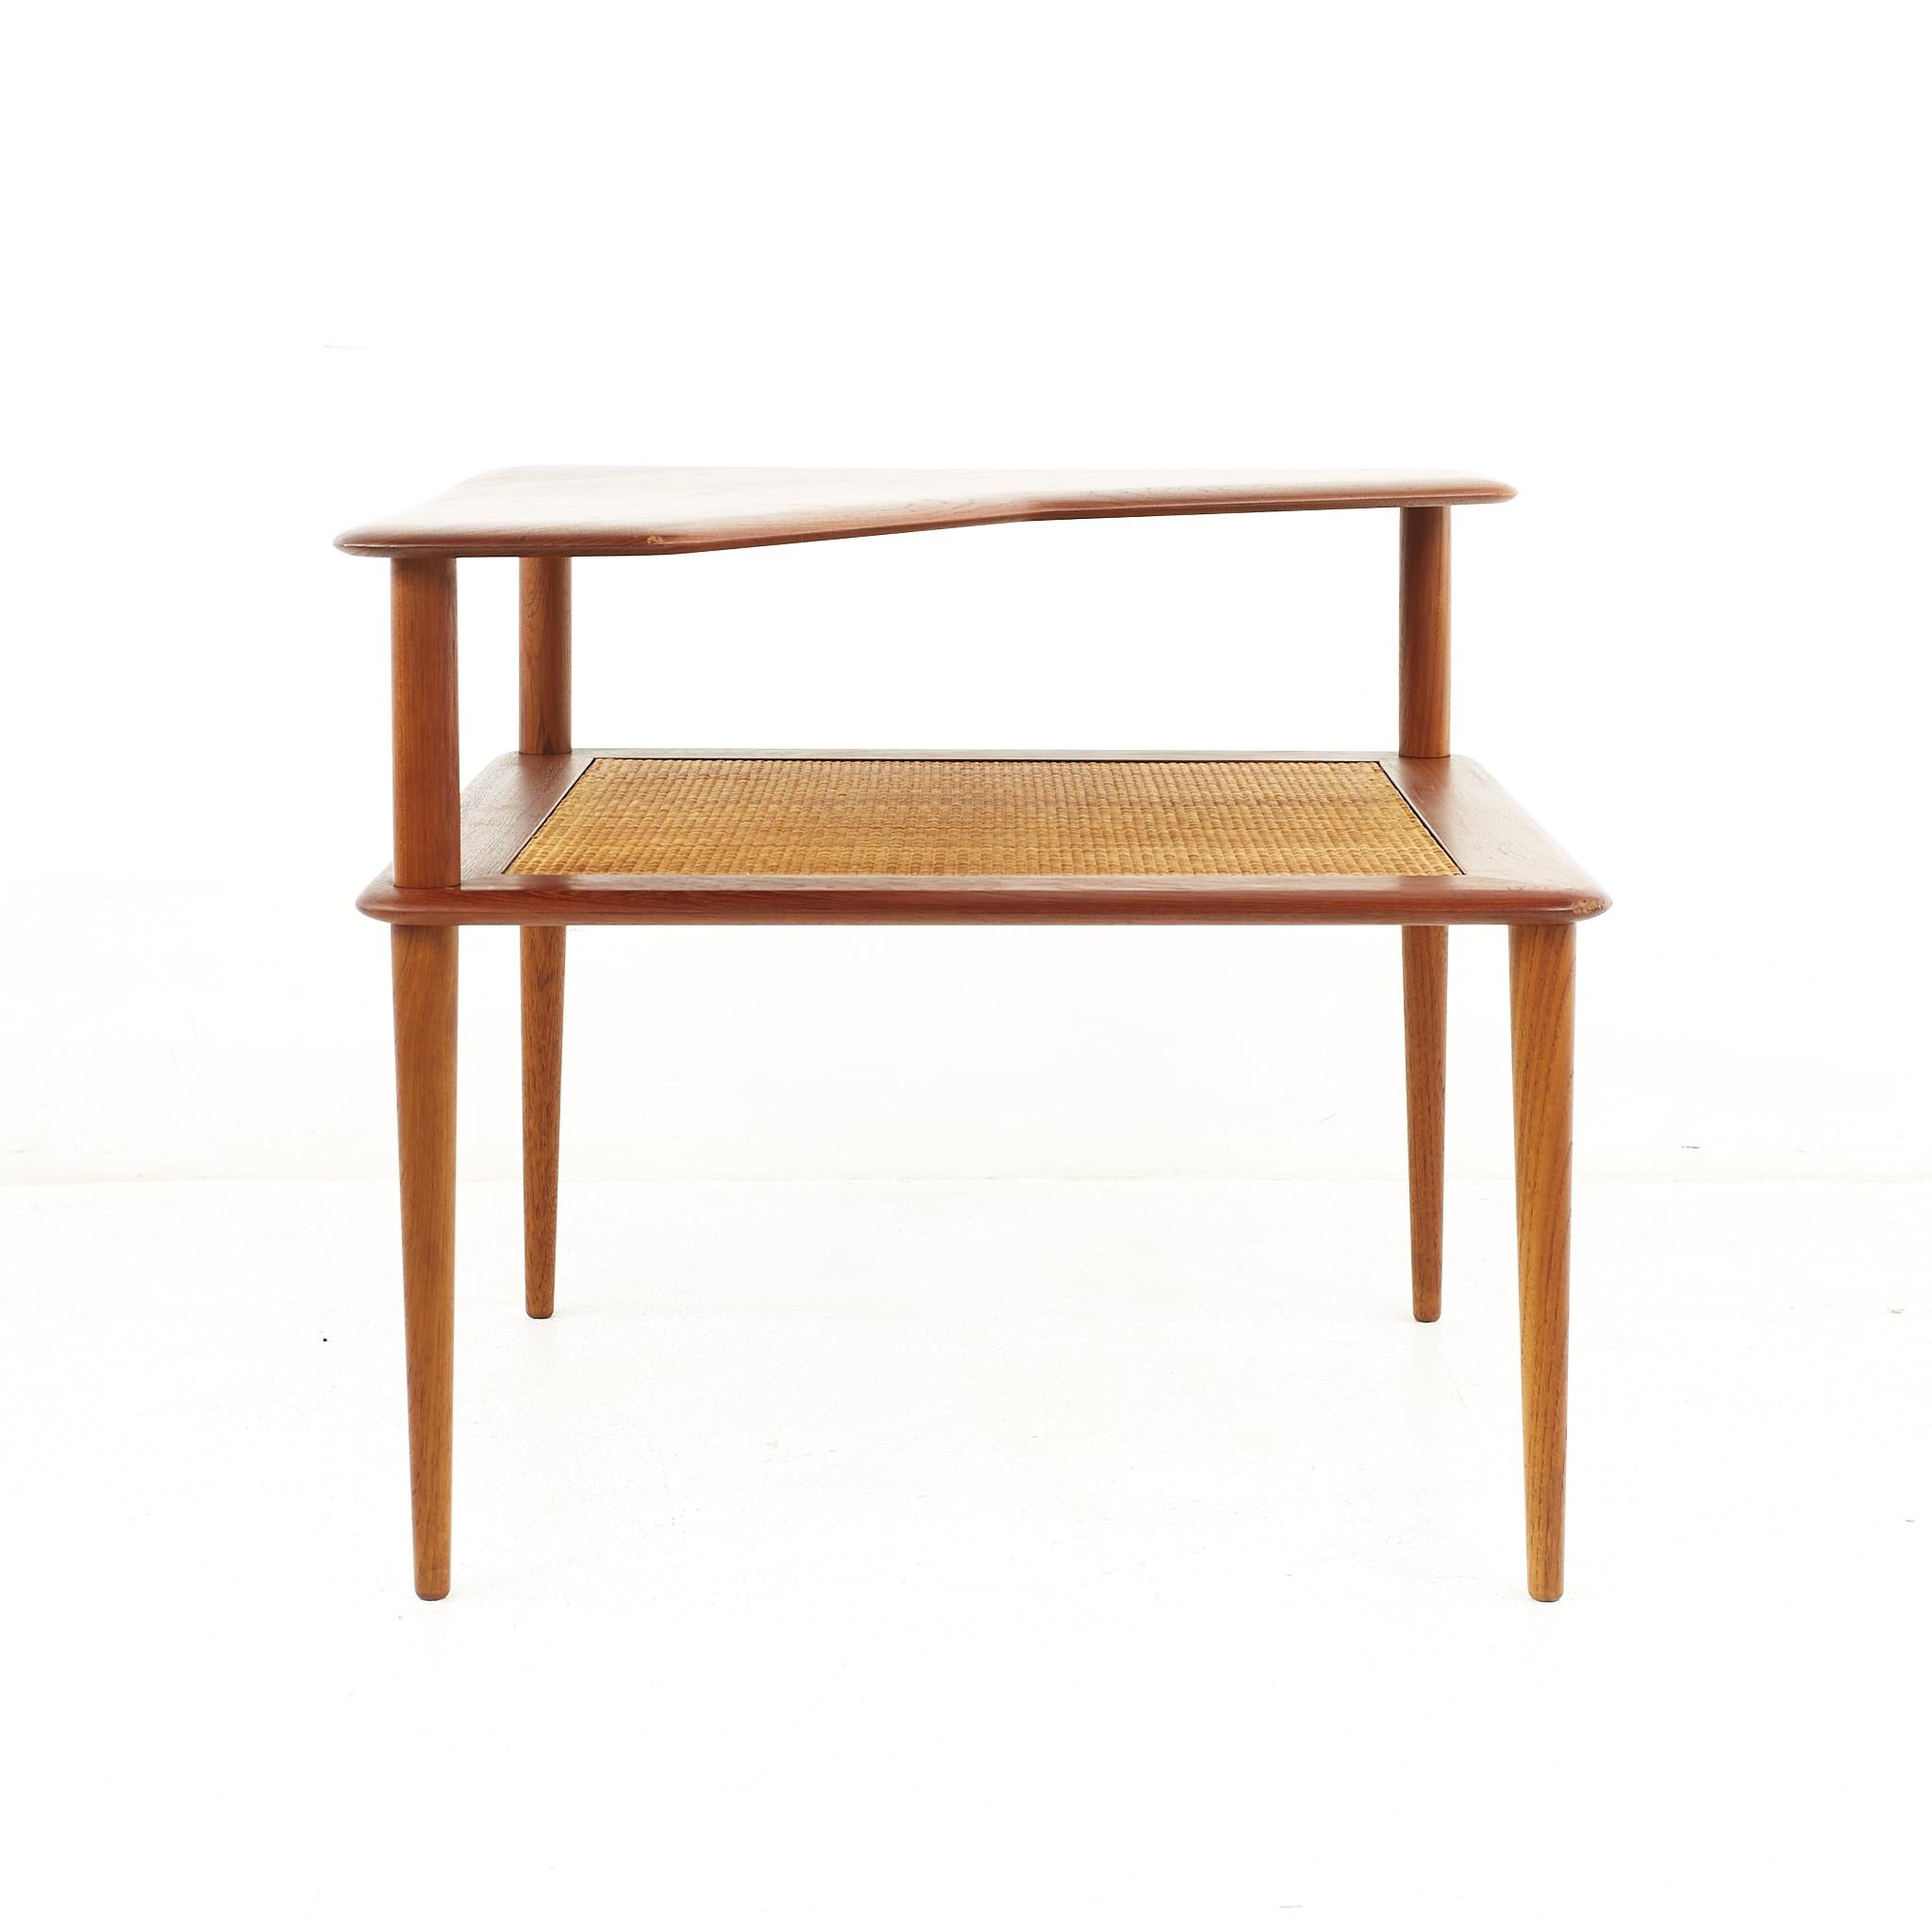 Peter Hvidt Mid Century Teak and Cane Step Corner Table

The table measures: 30 wide x 30 deep x 25 inches high

All pieces of furniture can be had in what we call restored vintage condition. That means the piece is restored upon purchase so